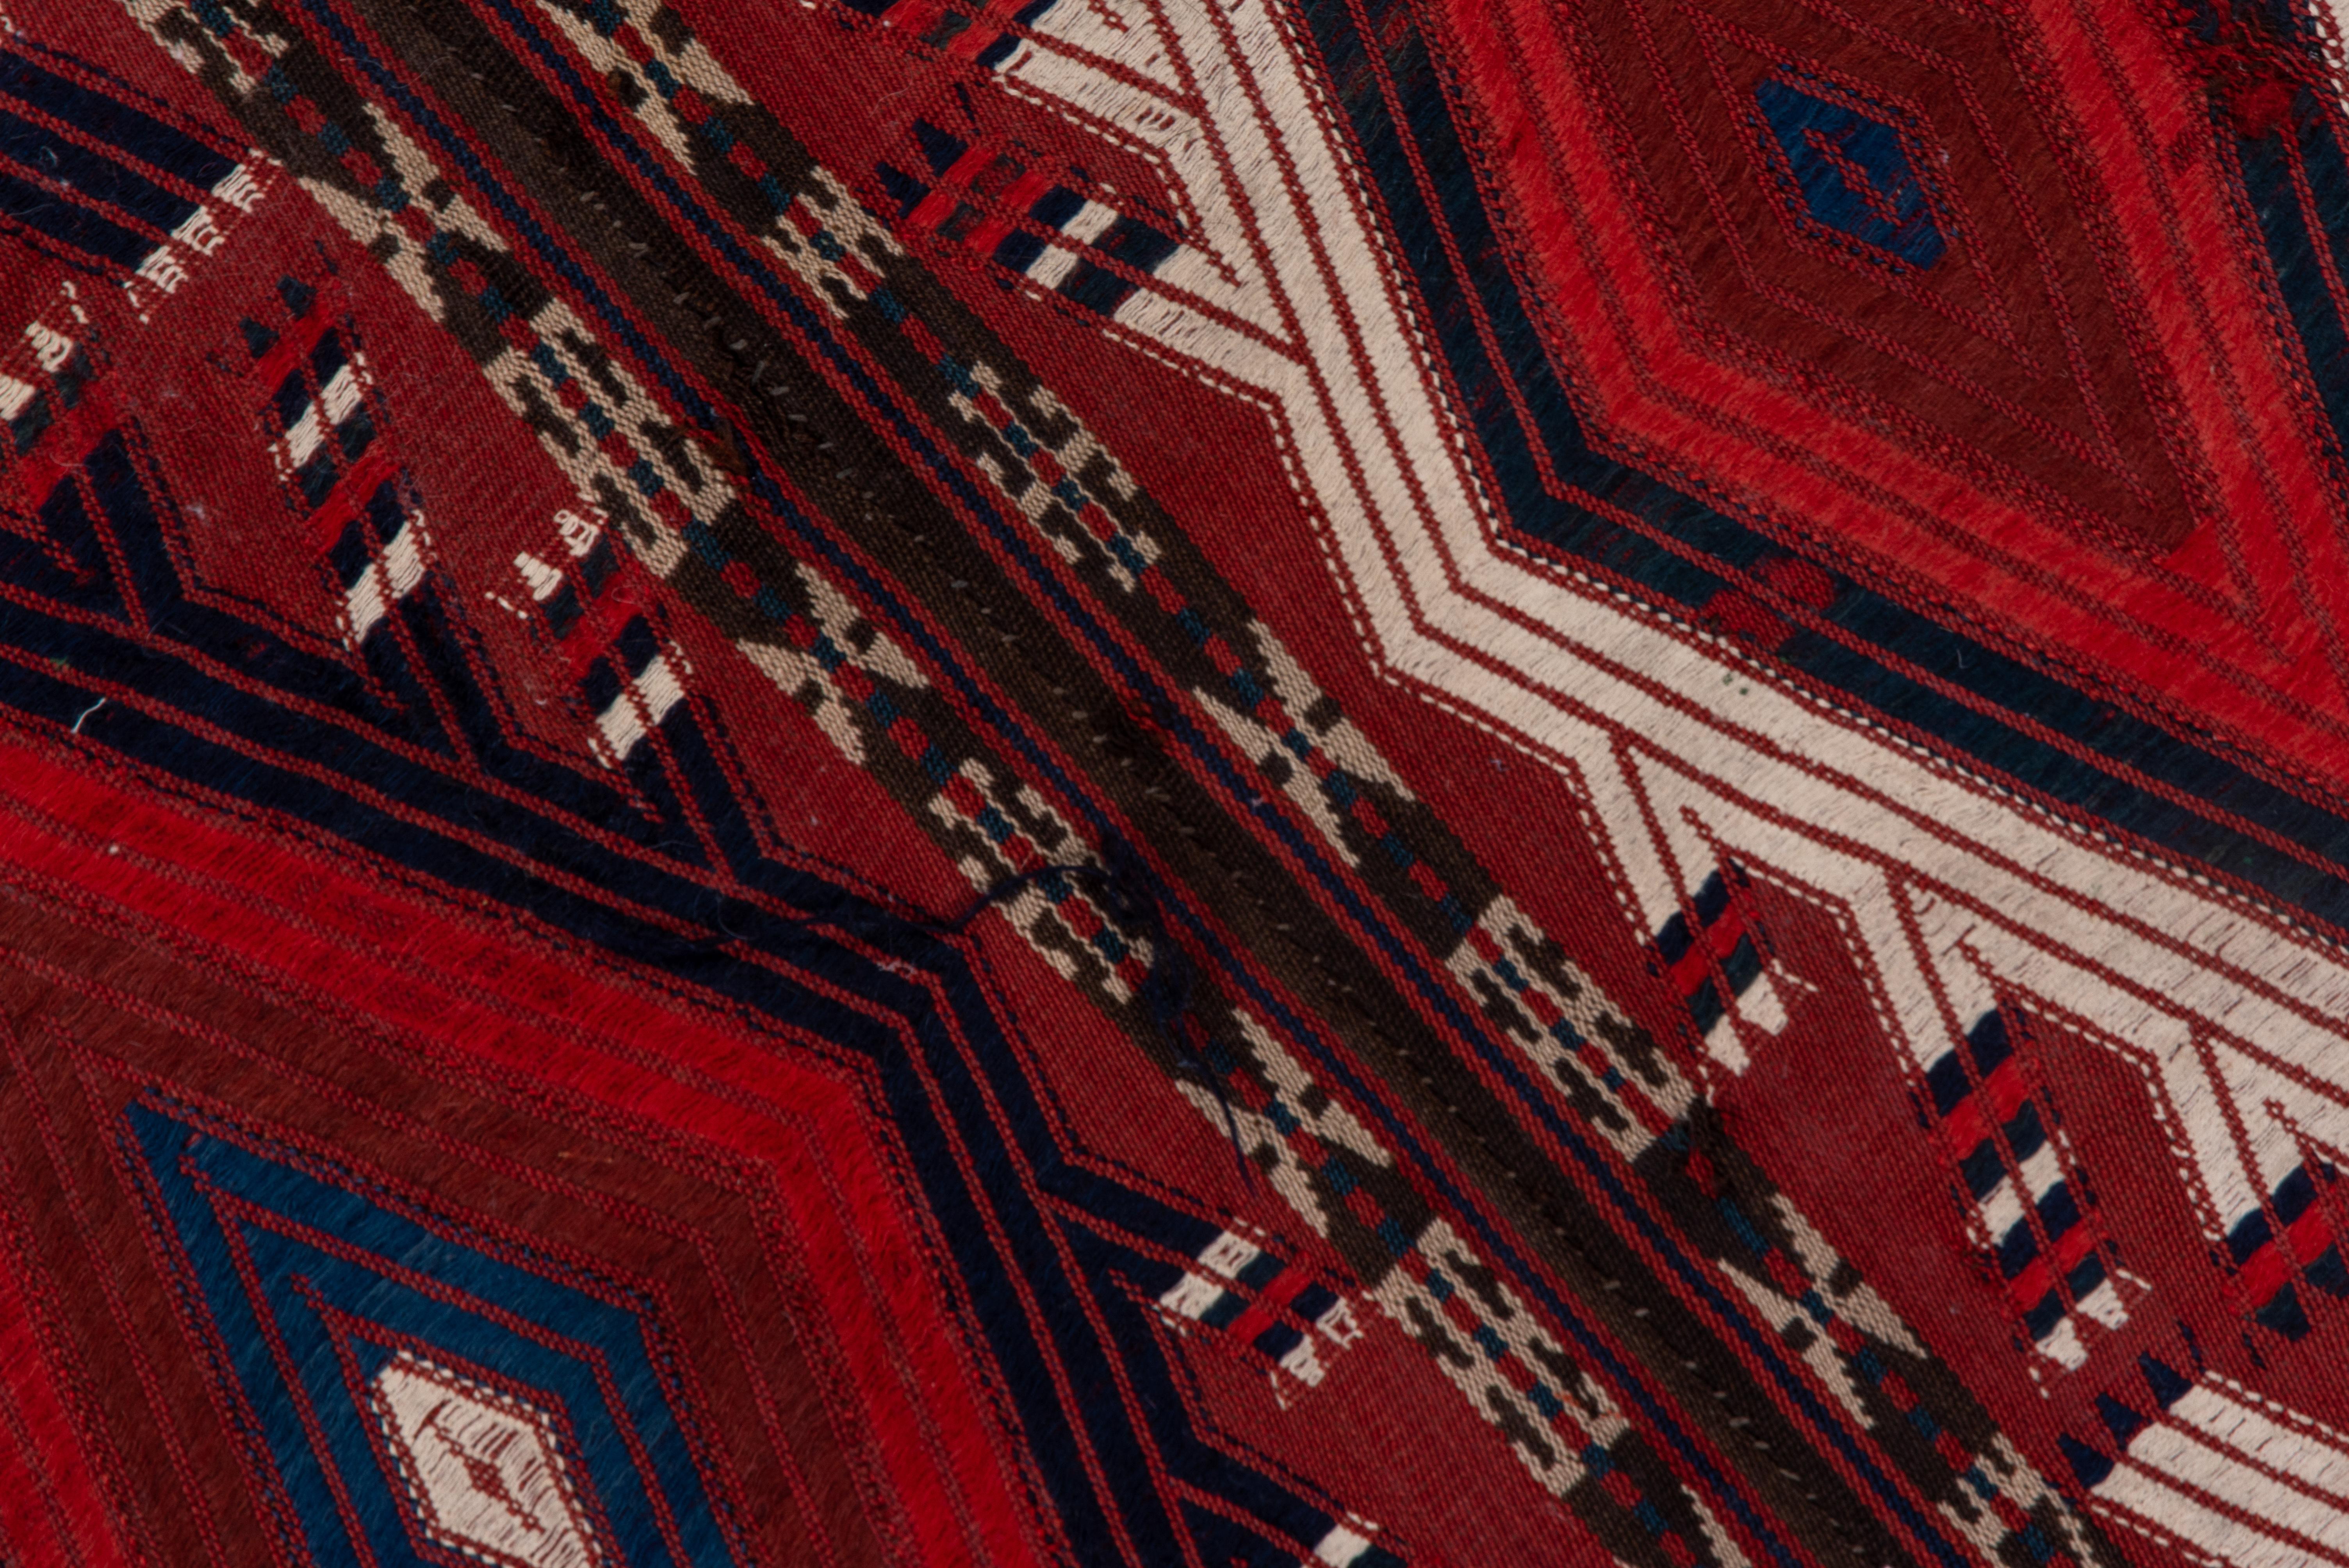 Composed of four strips edge joined of a Yomud tent band, this Central Asian nomadic textile artifact shows a repeating tall lozenge design with rams' Horn finials. White cotton highlights a palette in two reds and two blues.